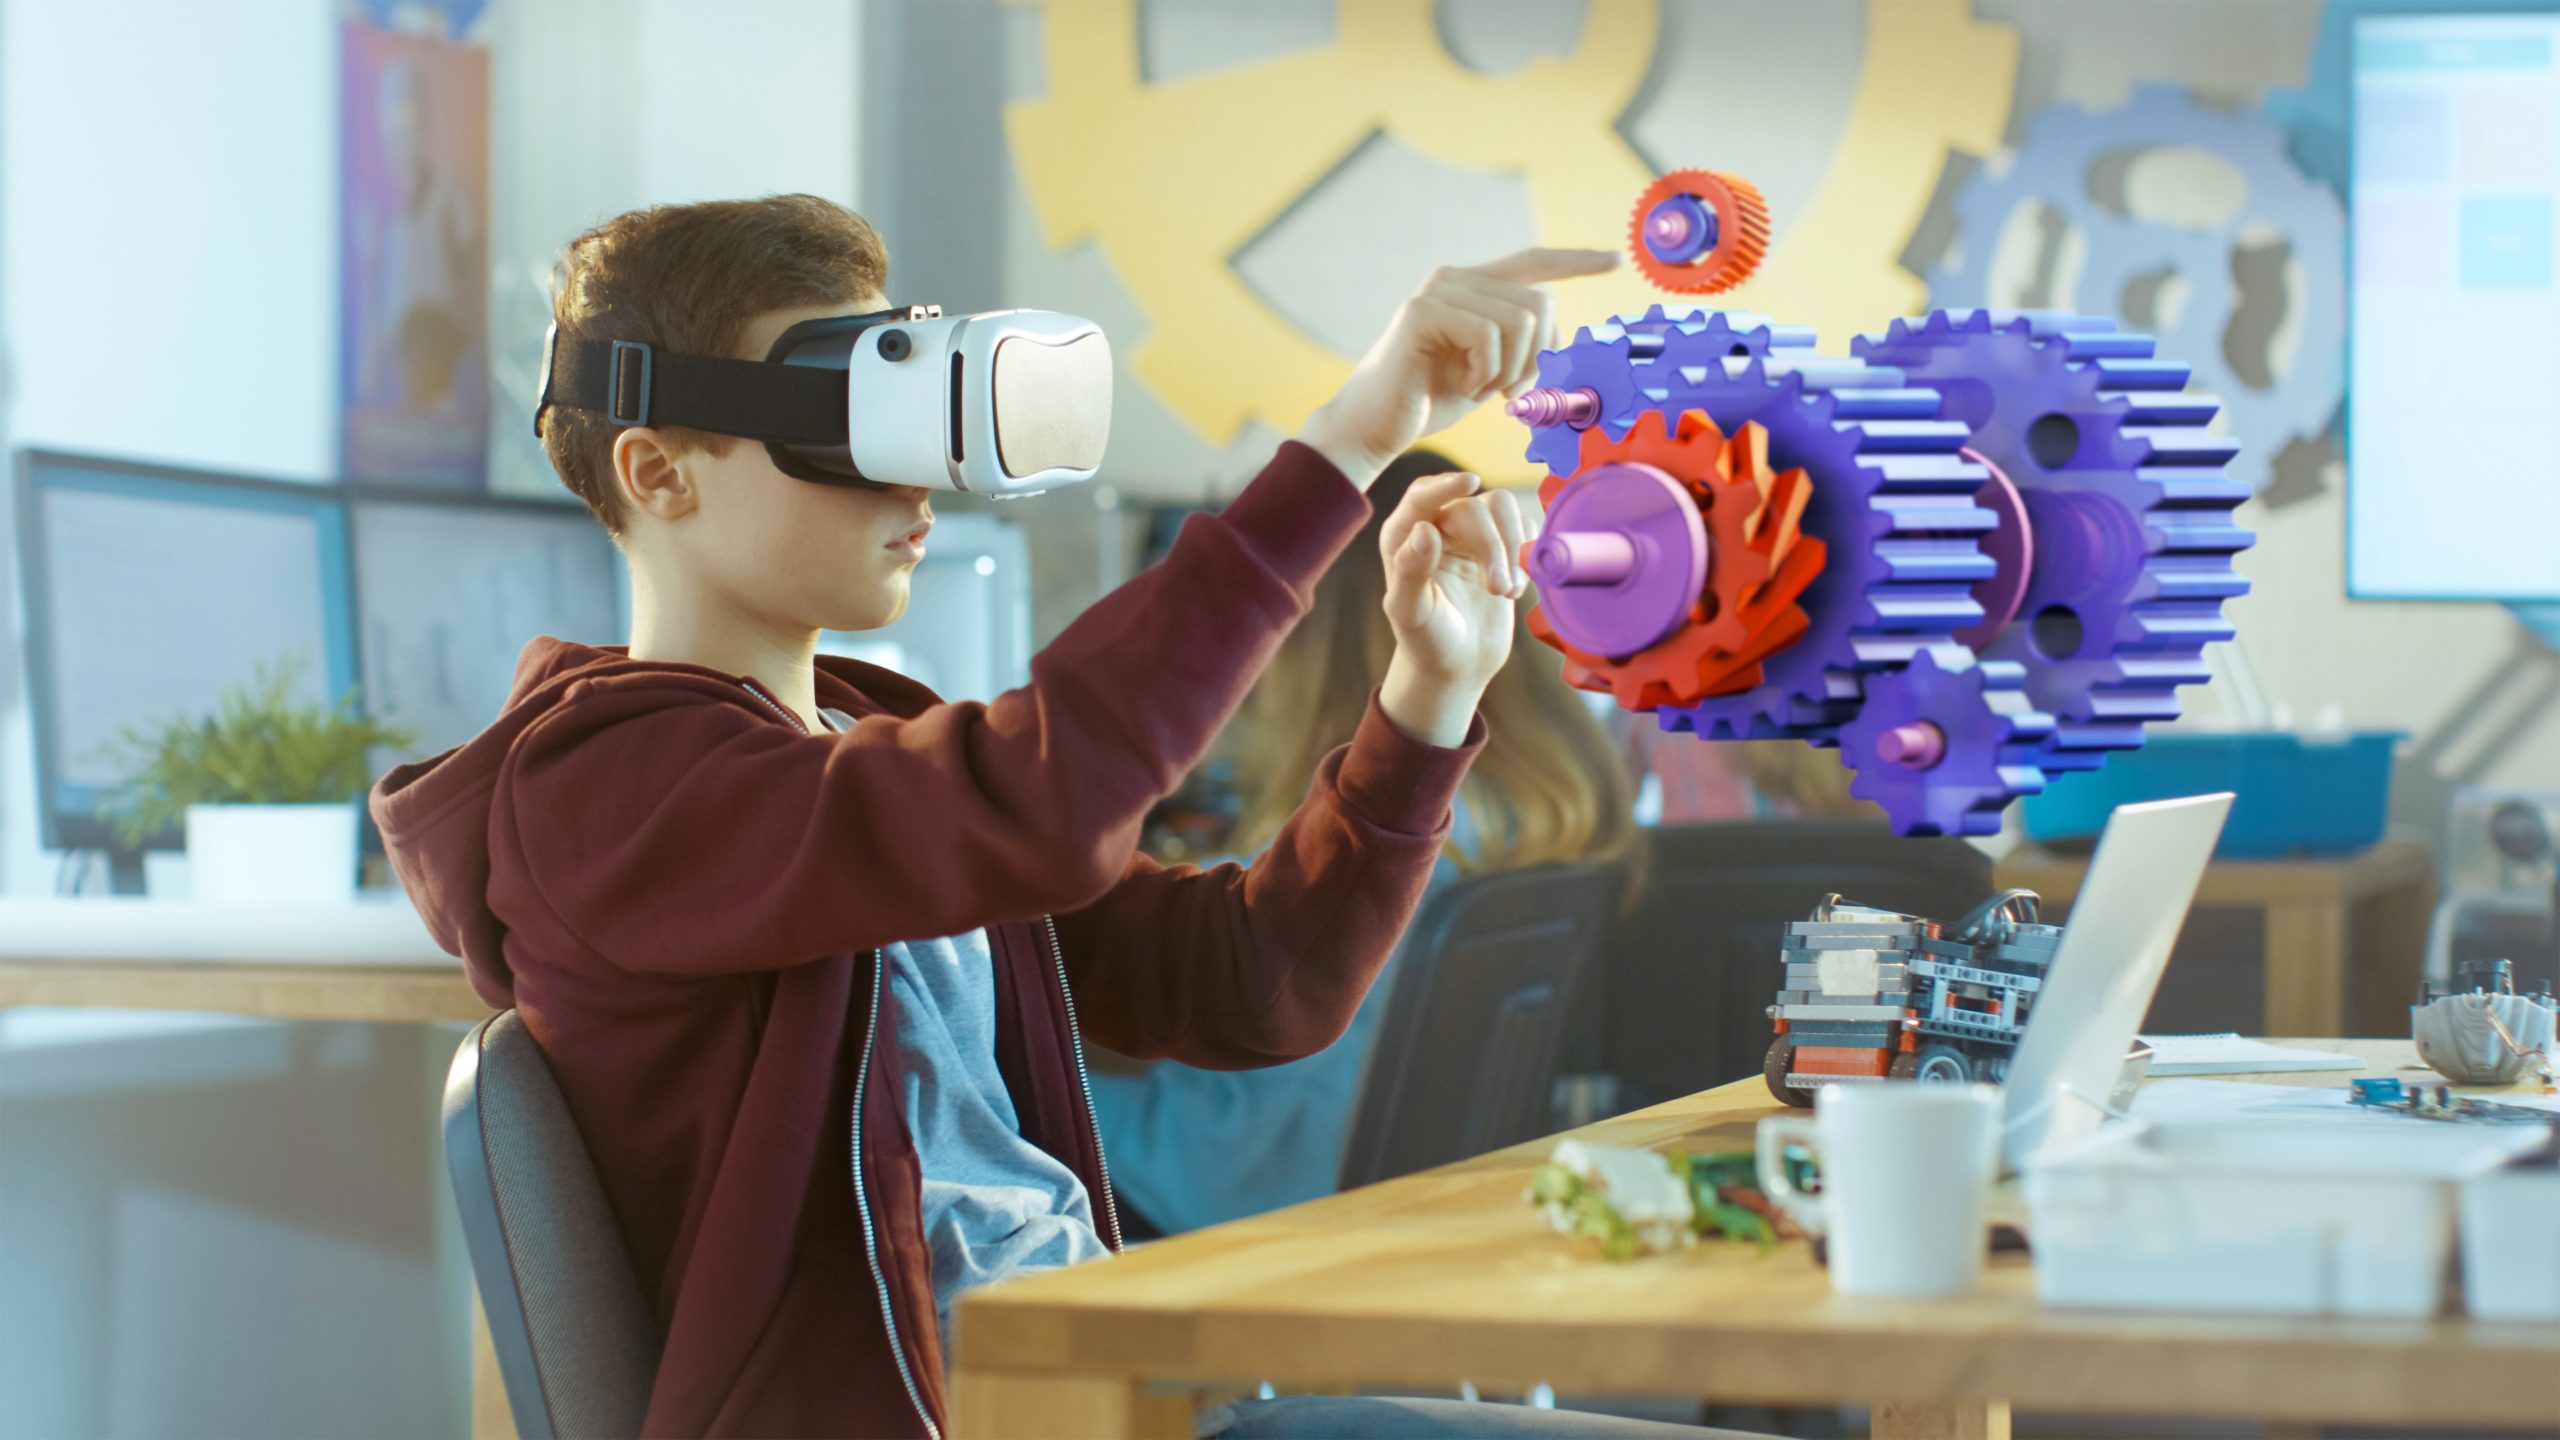 Innovative Ways to Use AR/VR in Education